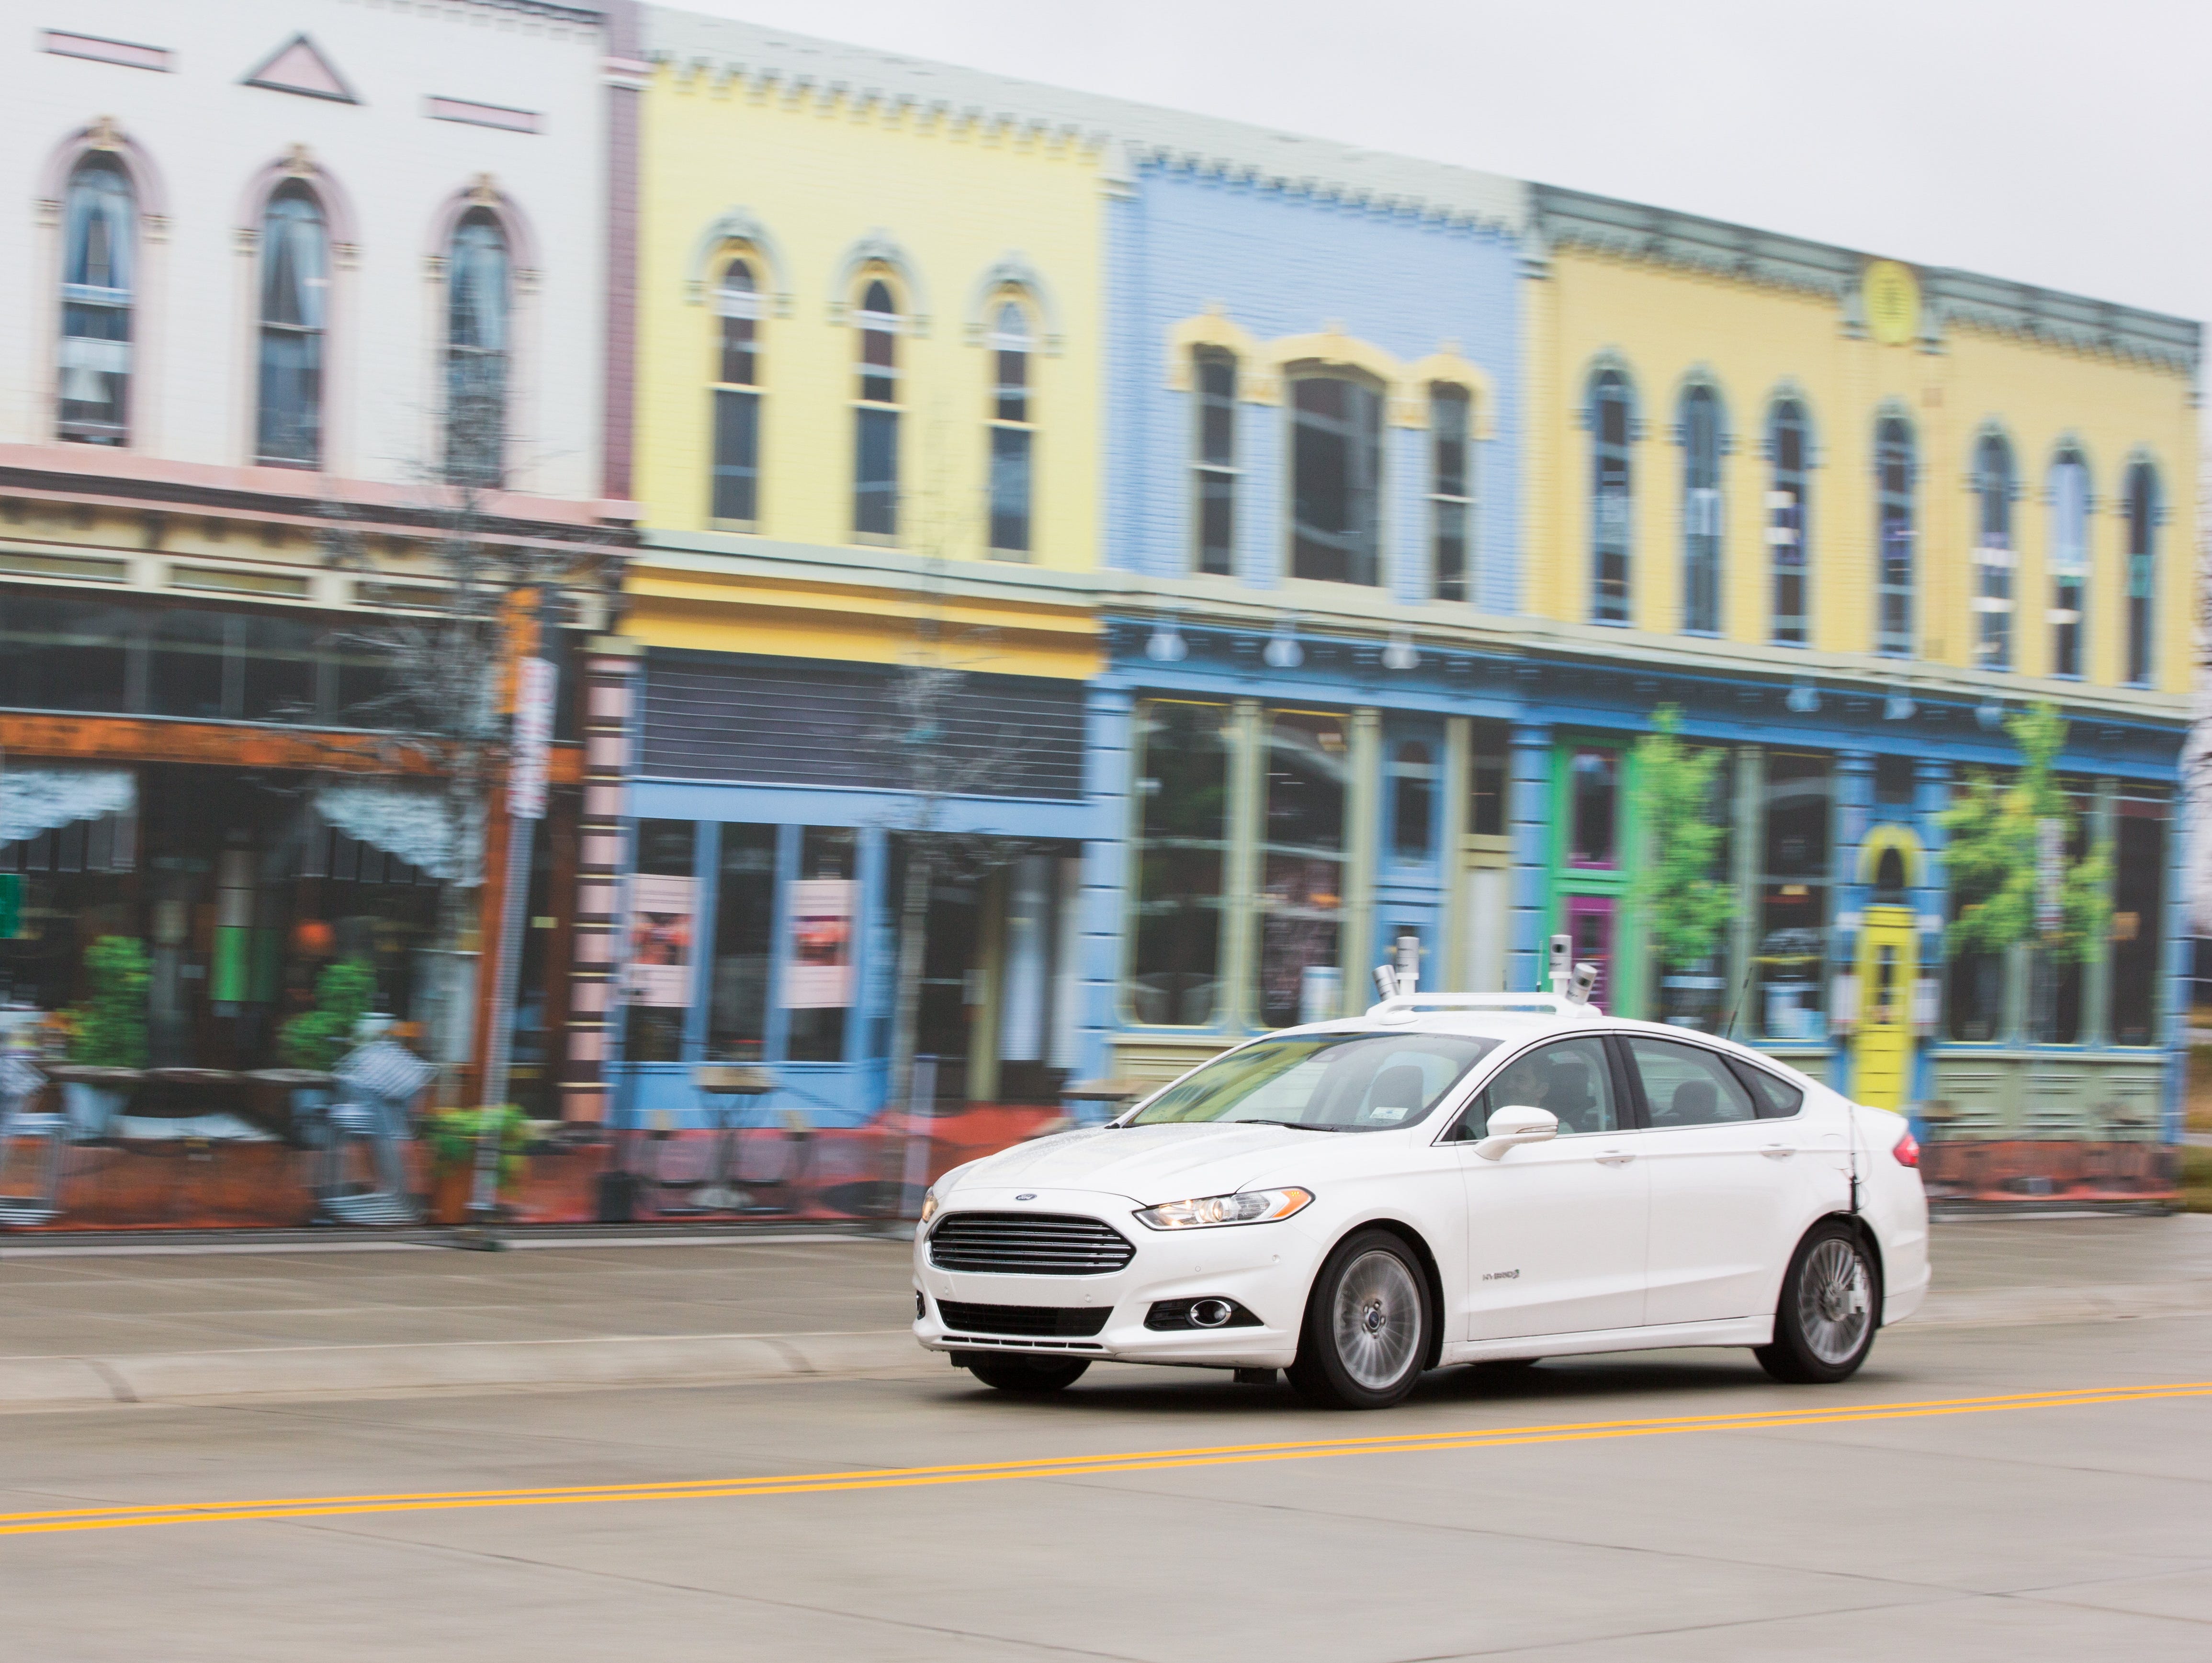 Ford will begin regularly testing is autonomous vehicles at Michigan's Mcity facility, the automaker announced Friday.